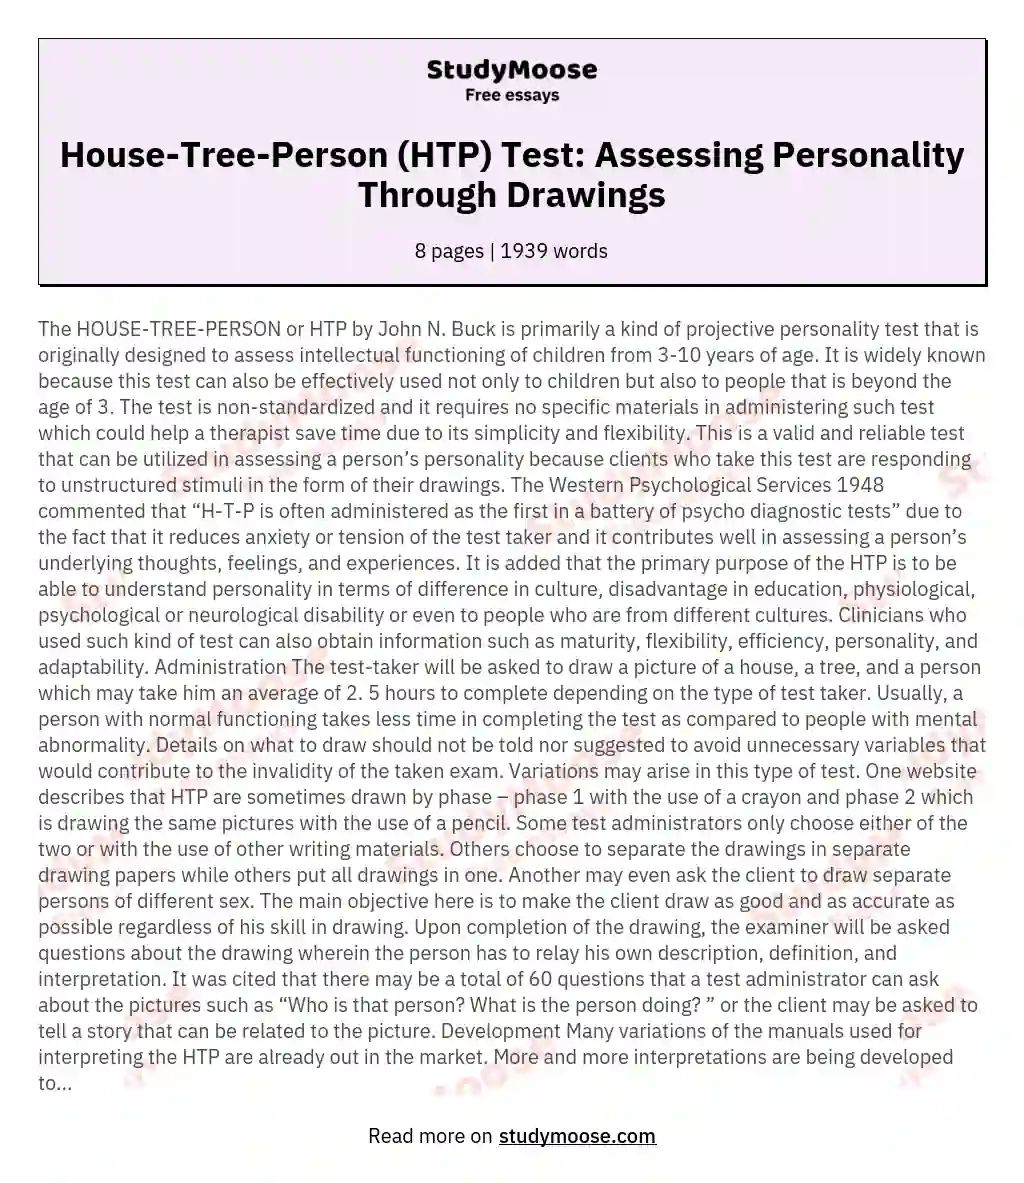 House-Tree-Person